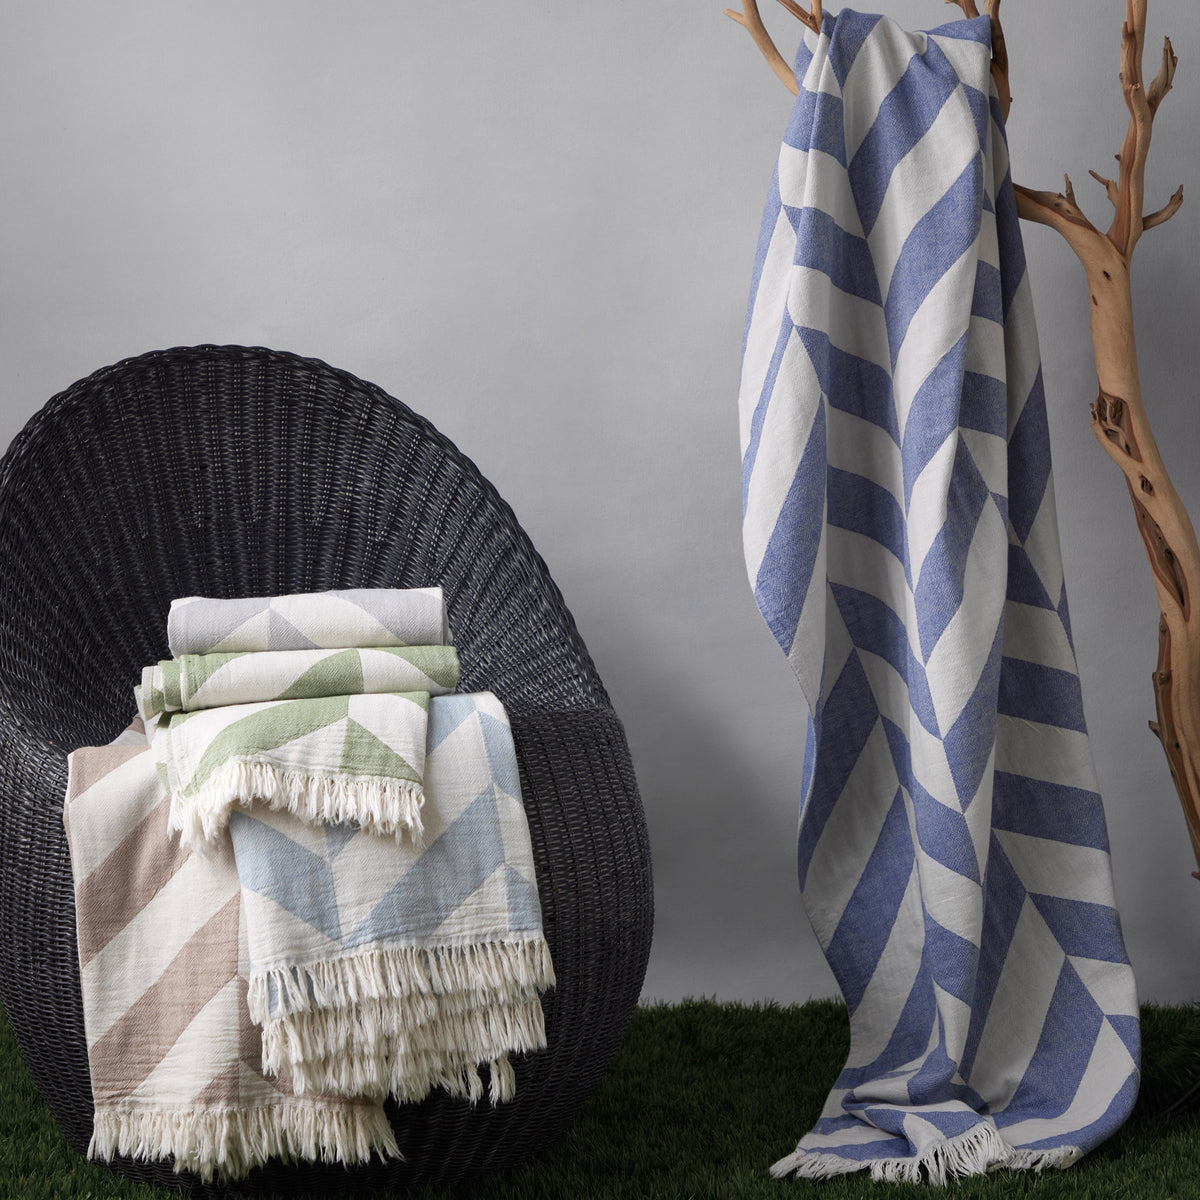 Lifestyle Shot of Matouk Paros Beach Towels in Different Colors